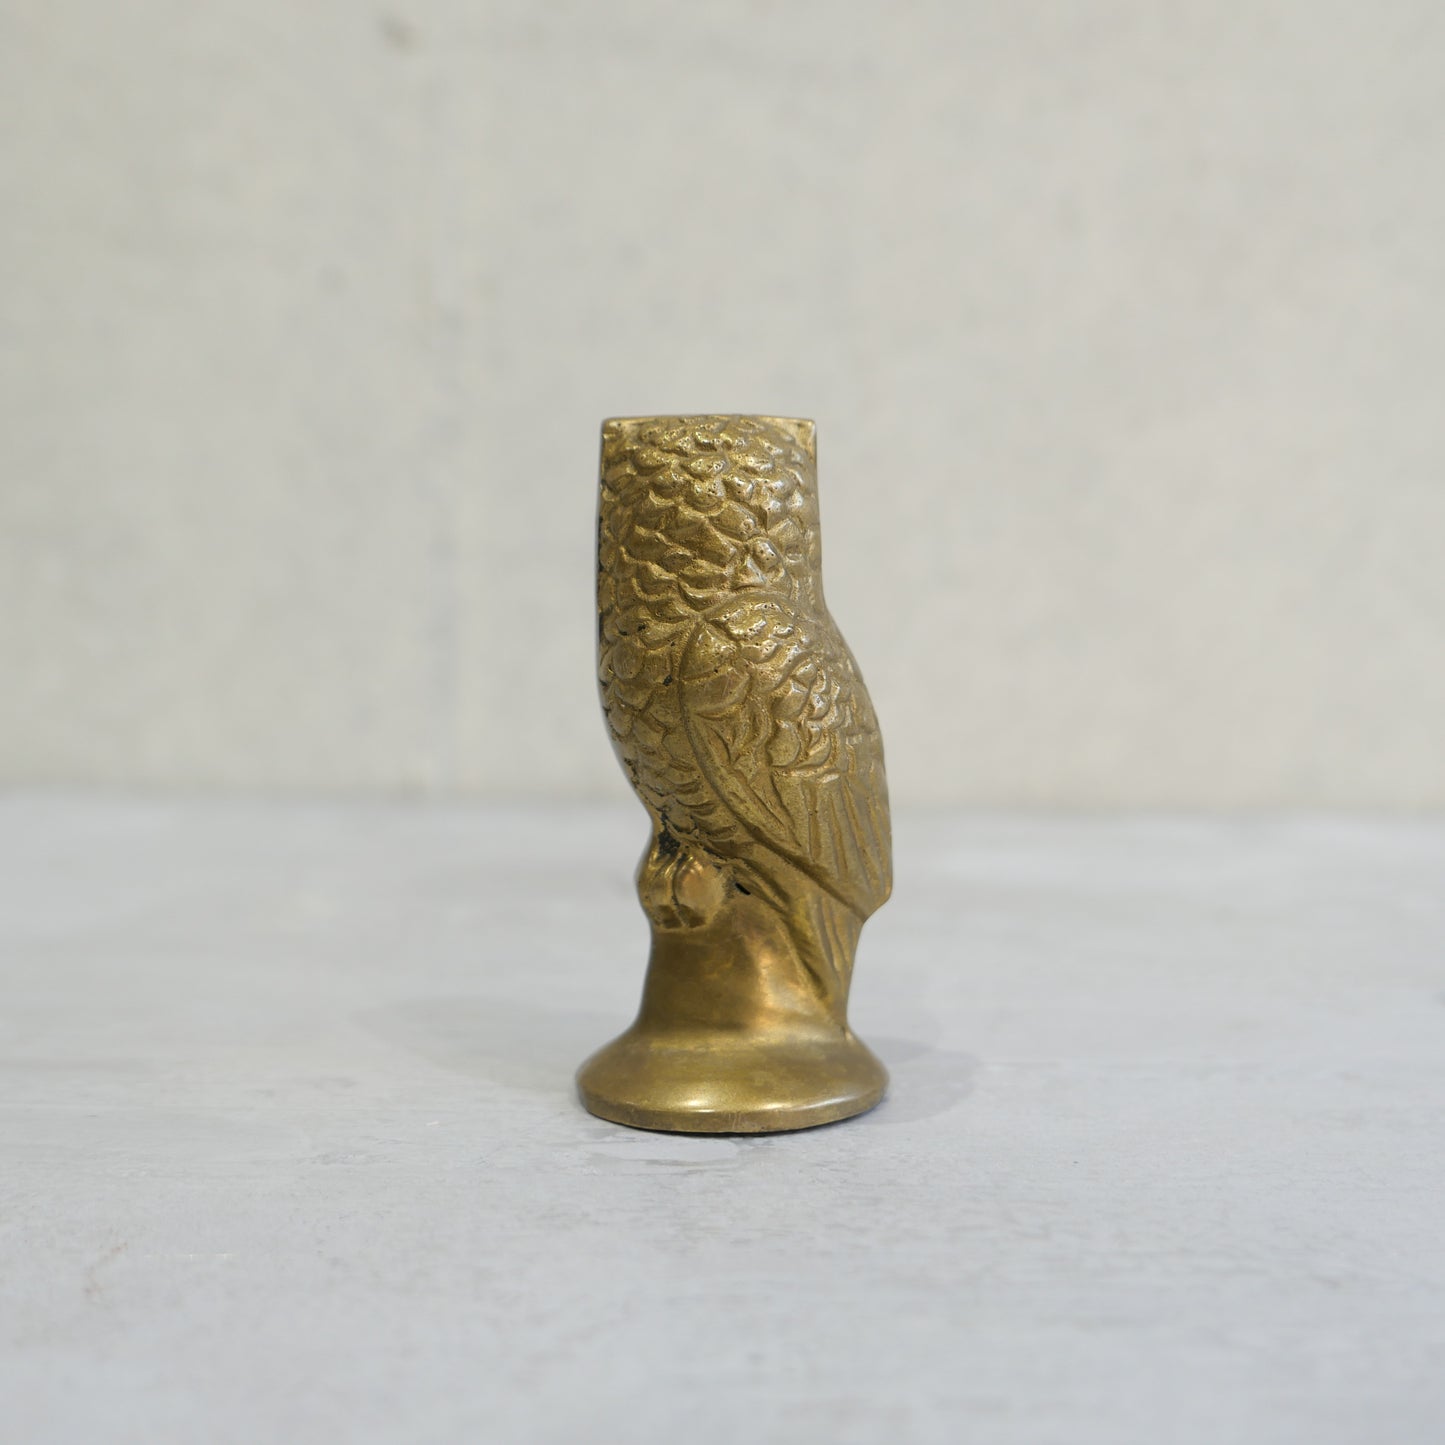 Vintage Owl Ornament or Paperweight 1950s